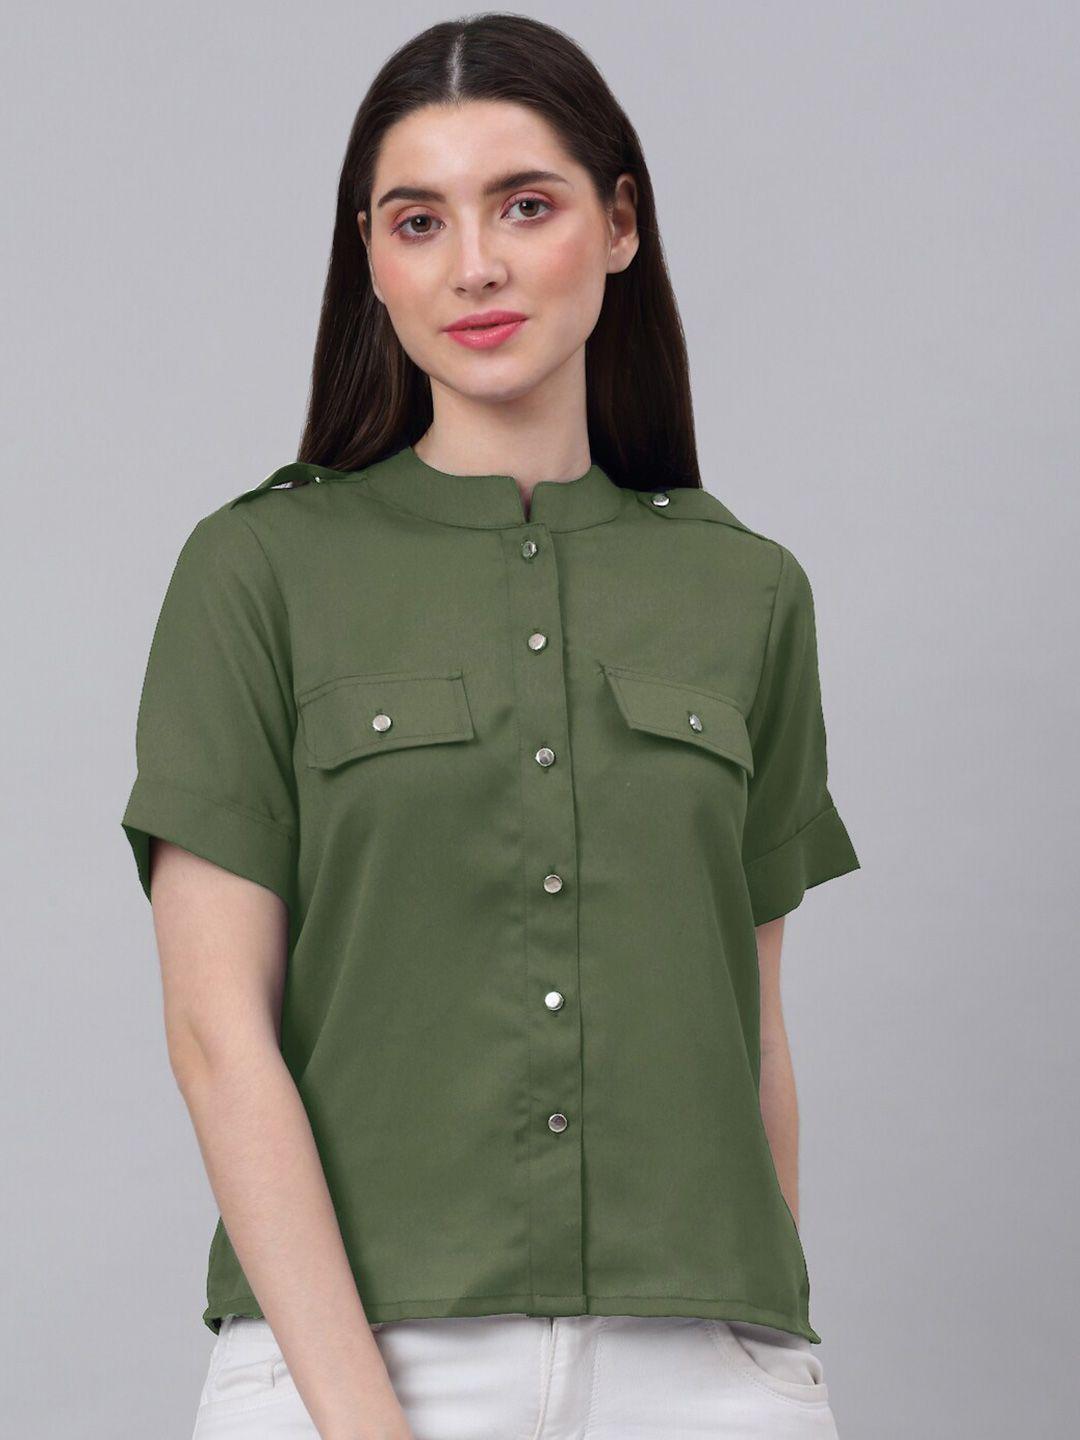 neudis-olive-green-solid-crepe-shirt-style-top